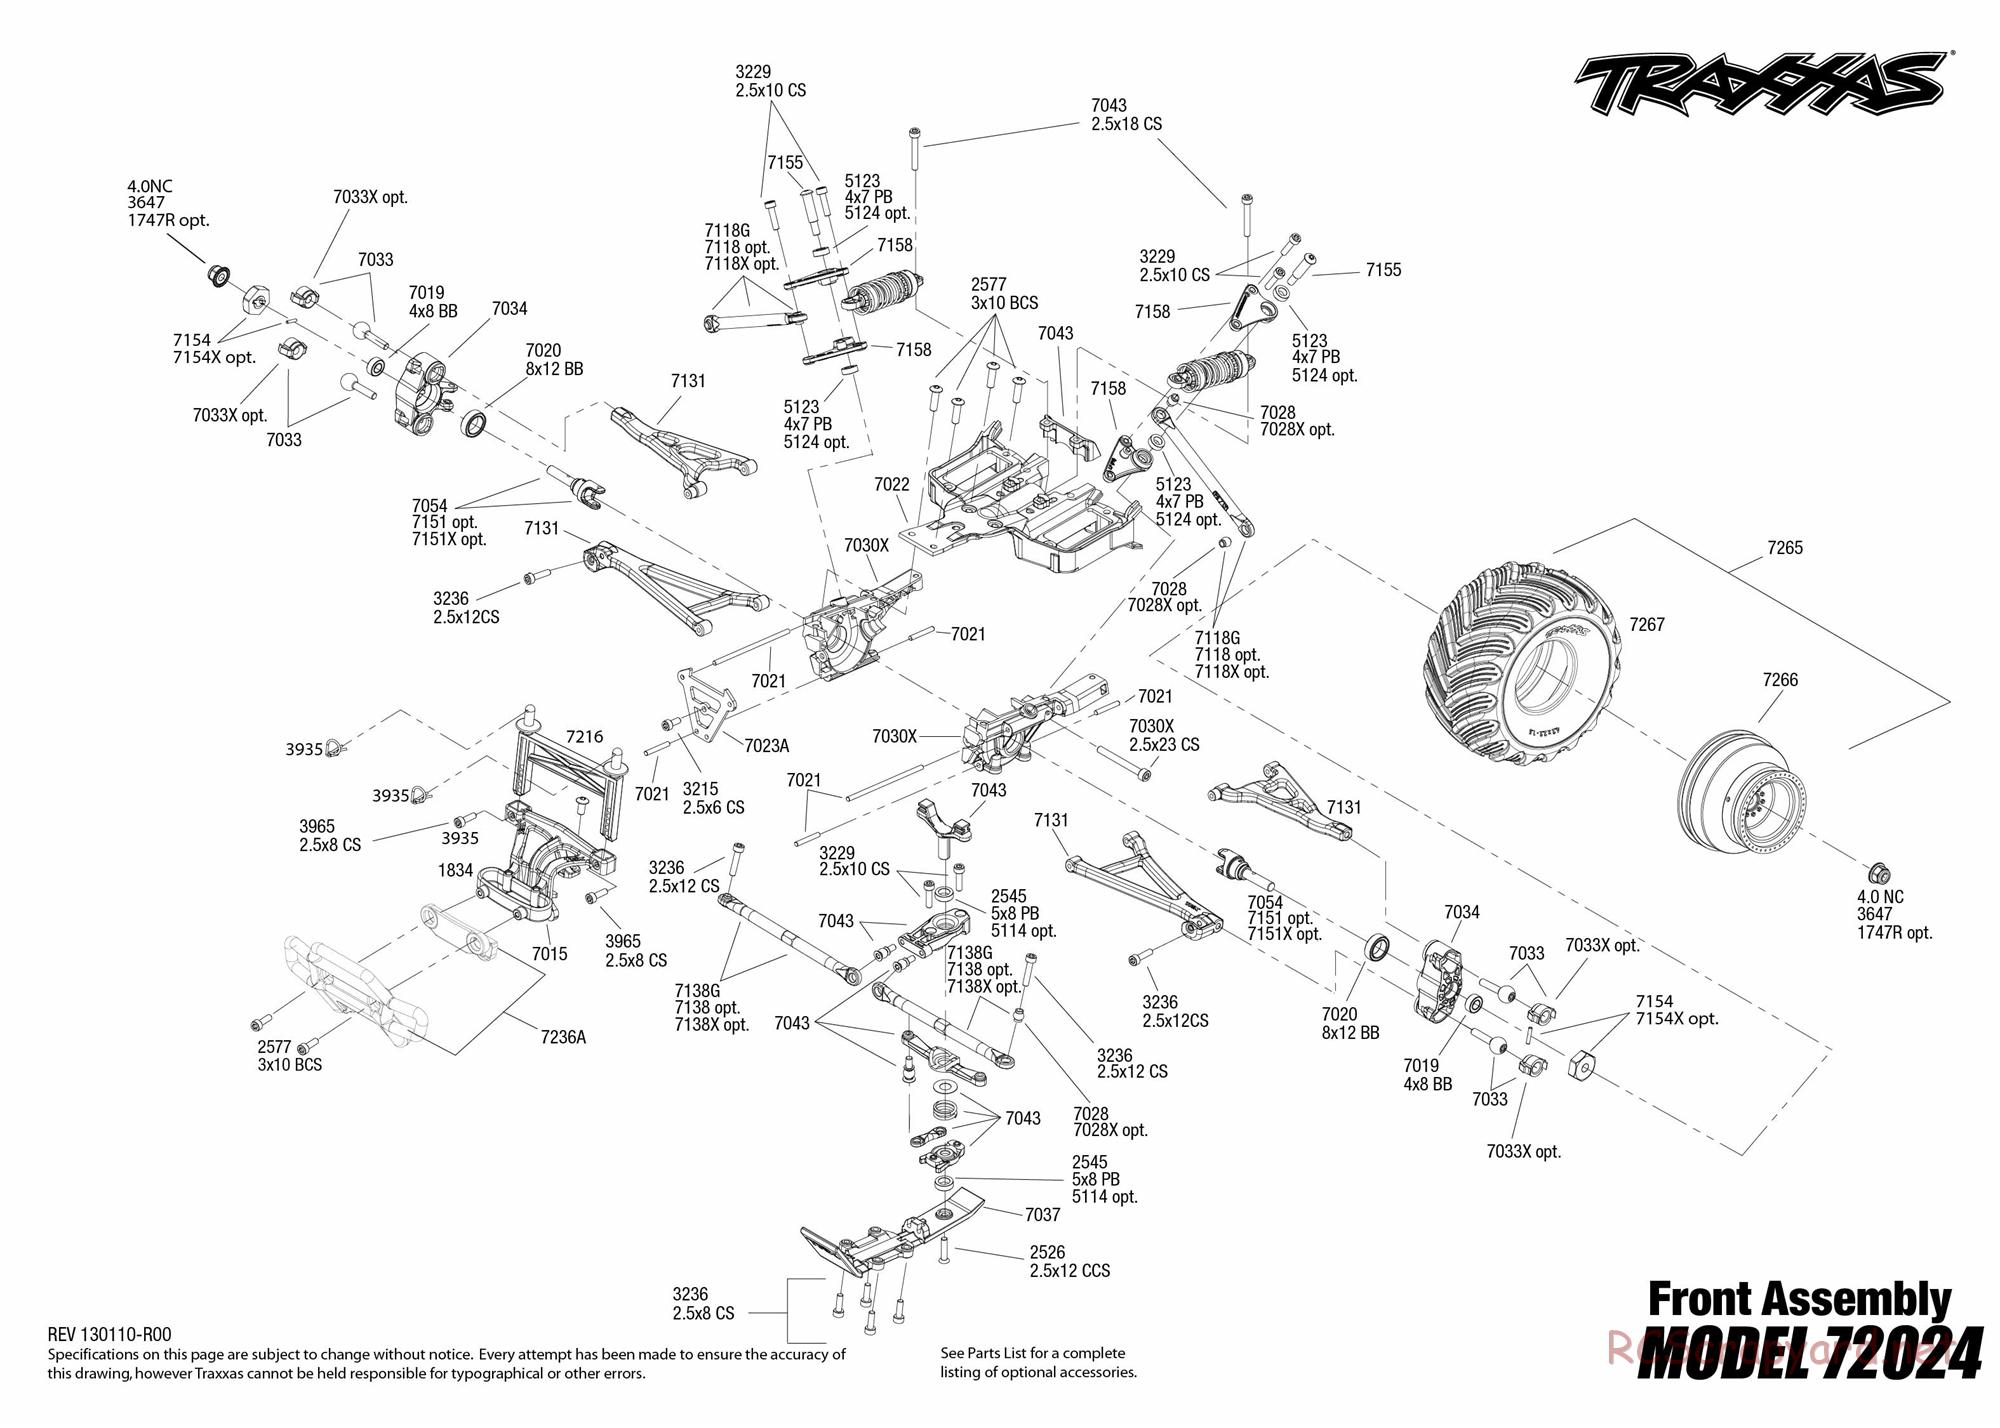 Traxxas - 1/16 Grave Digger (2013) - Exploded Views - Page 3